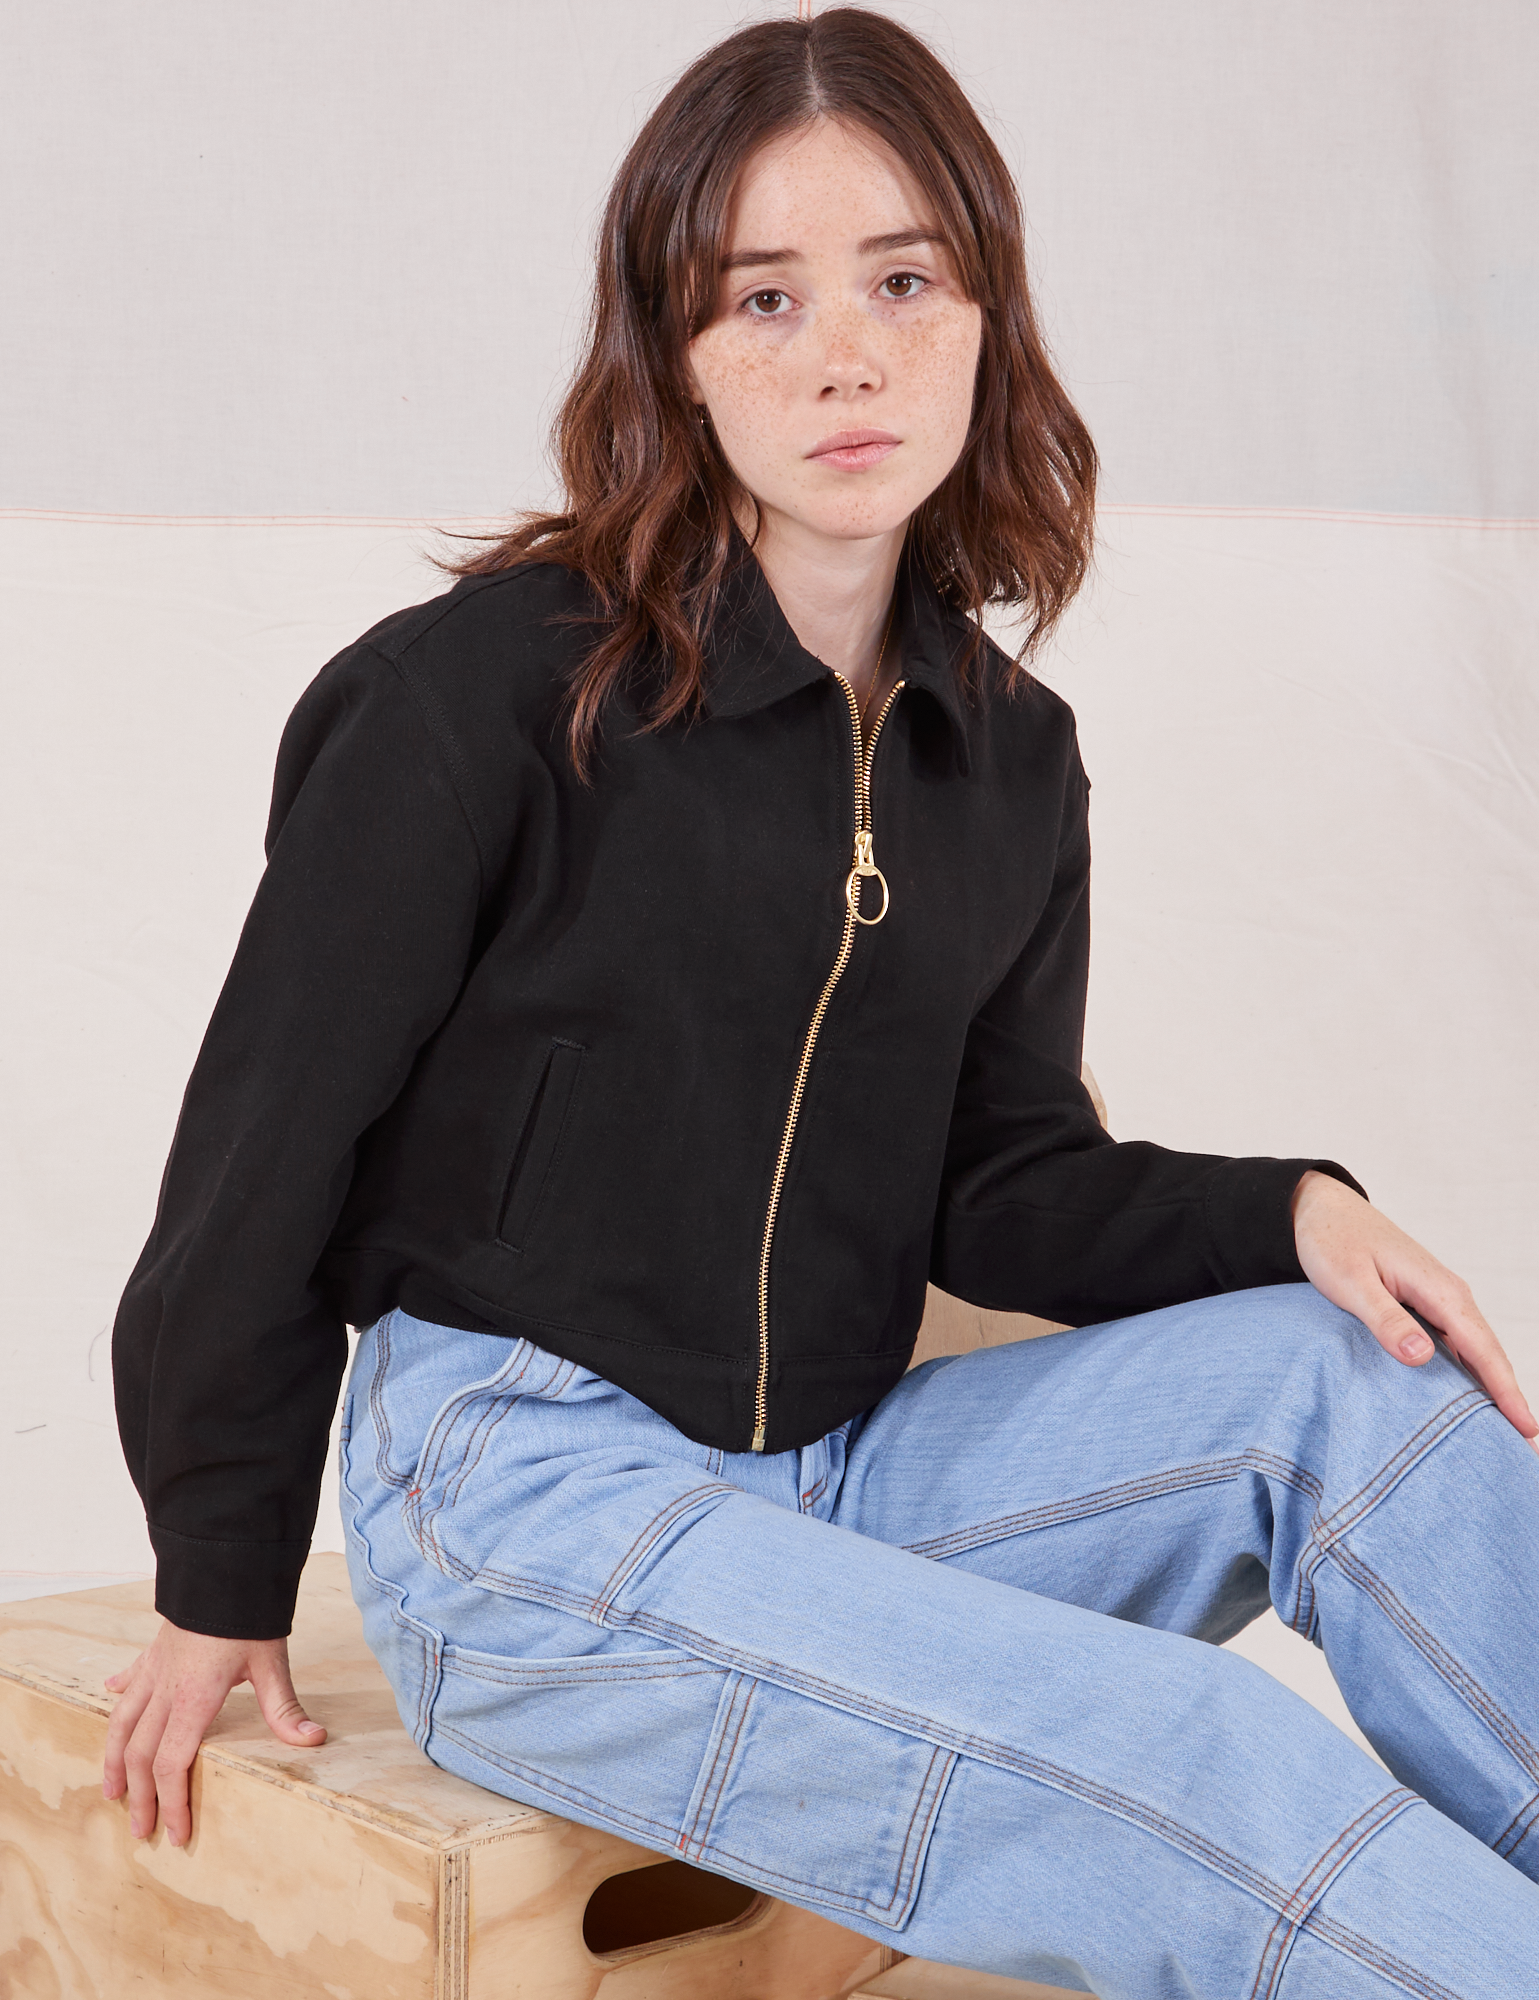 Hana is wearing Ricky Jacket in Basic Black and light wash Carpenter Jeans